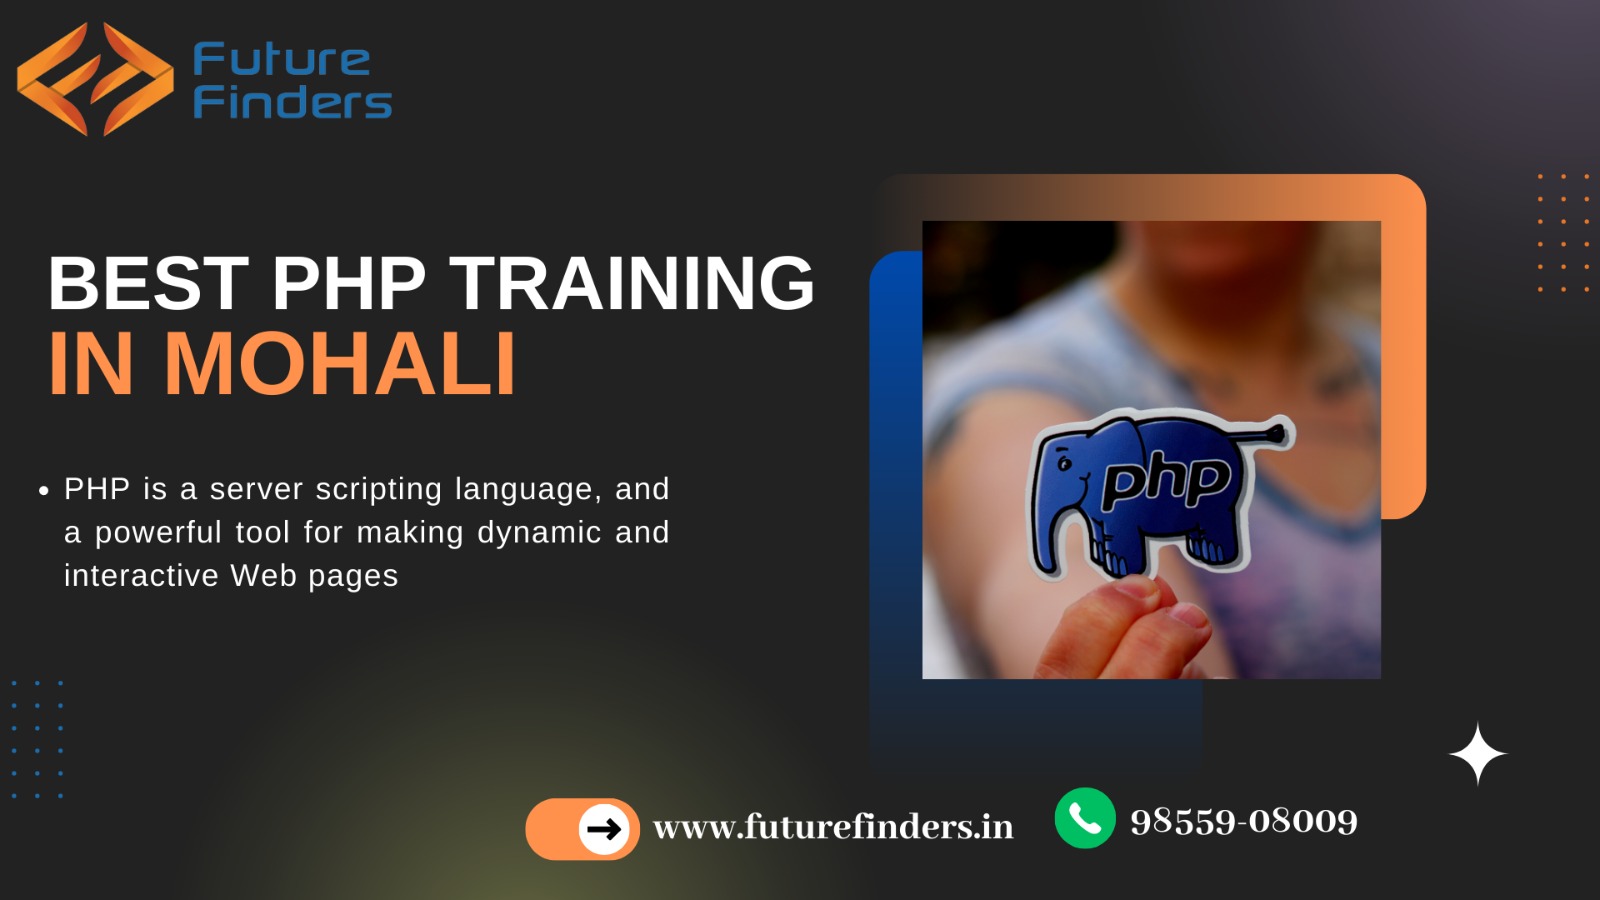 Best PHP Industrial Training in Chandigarh Mohali